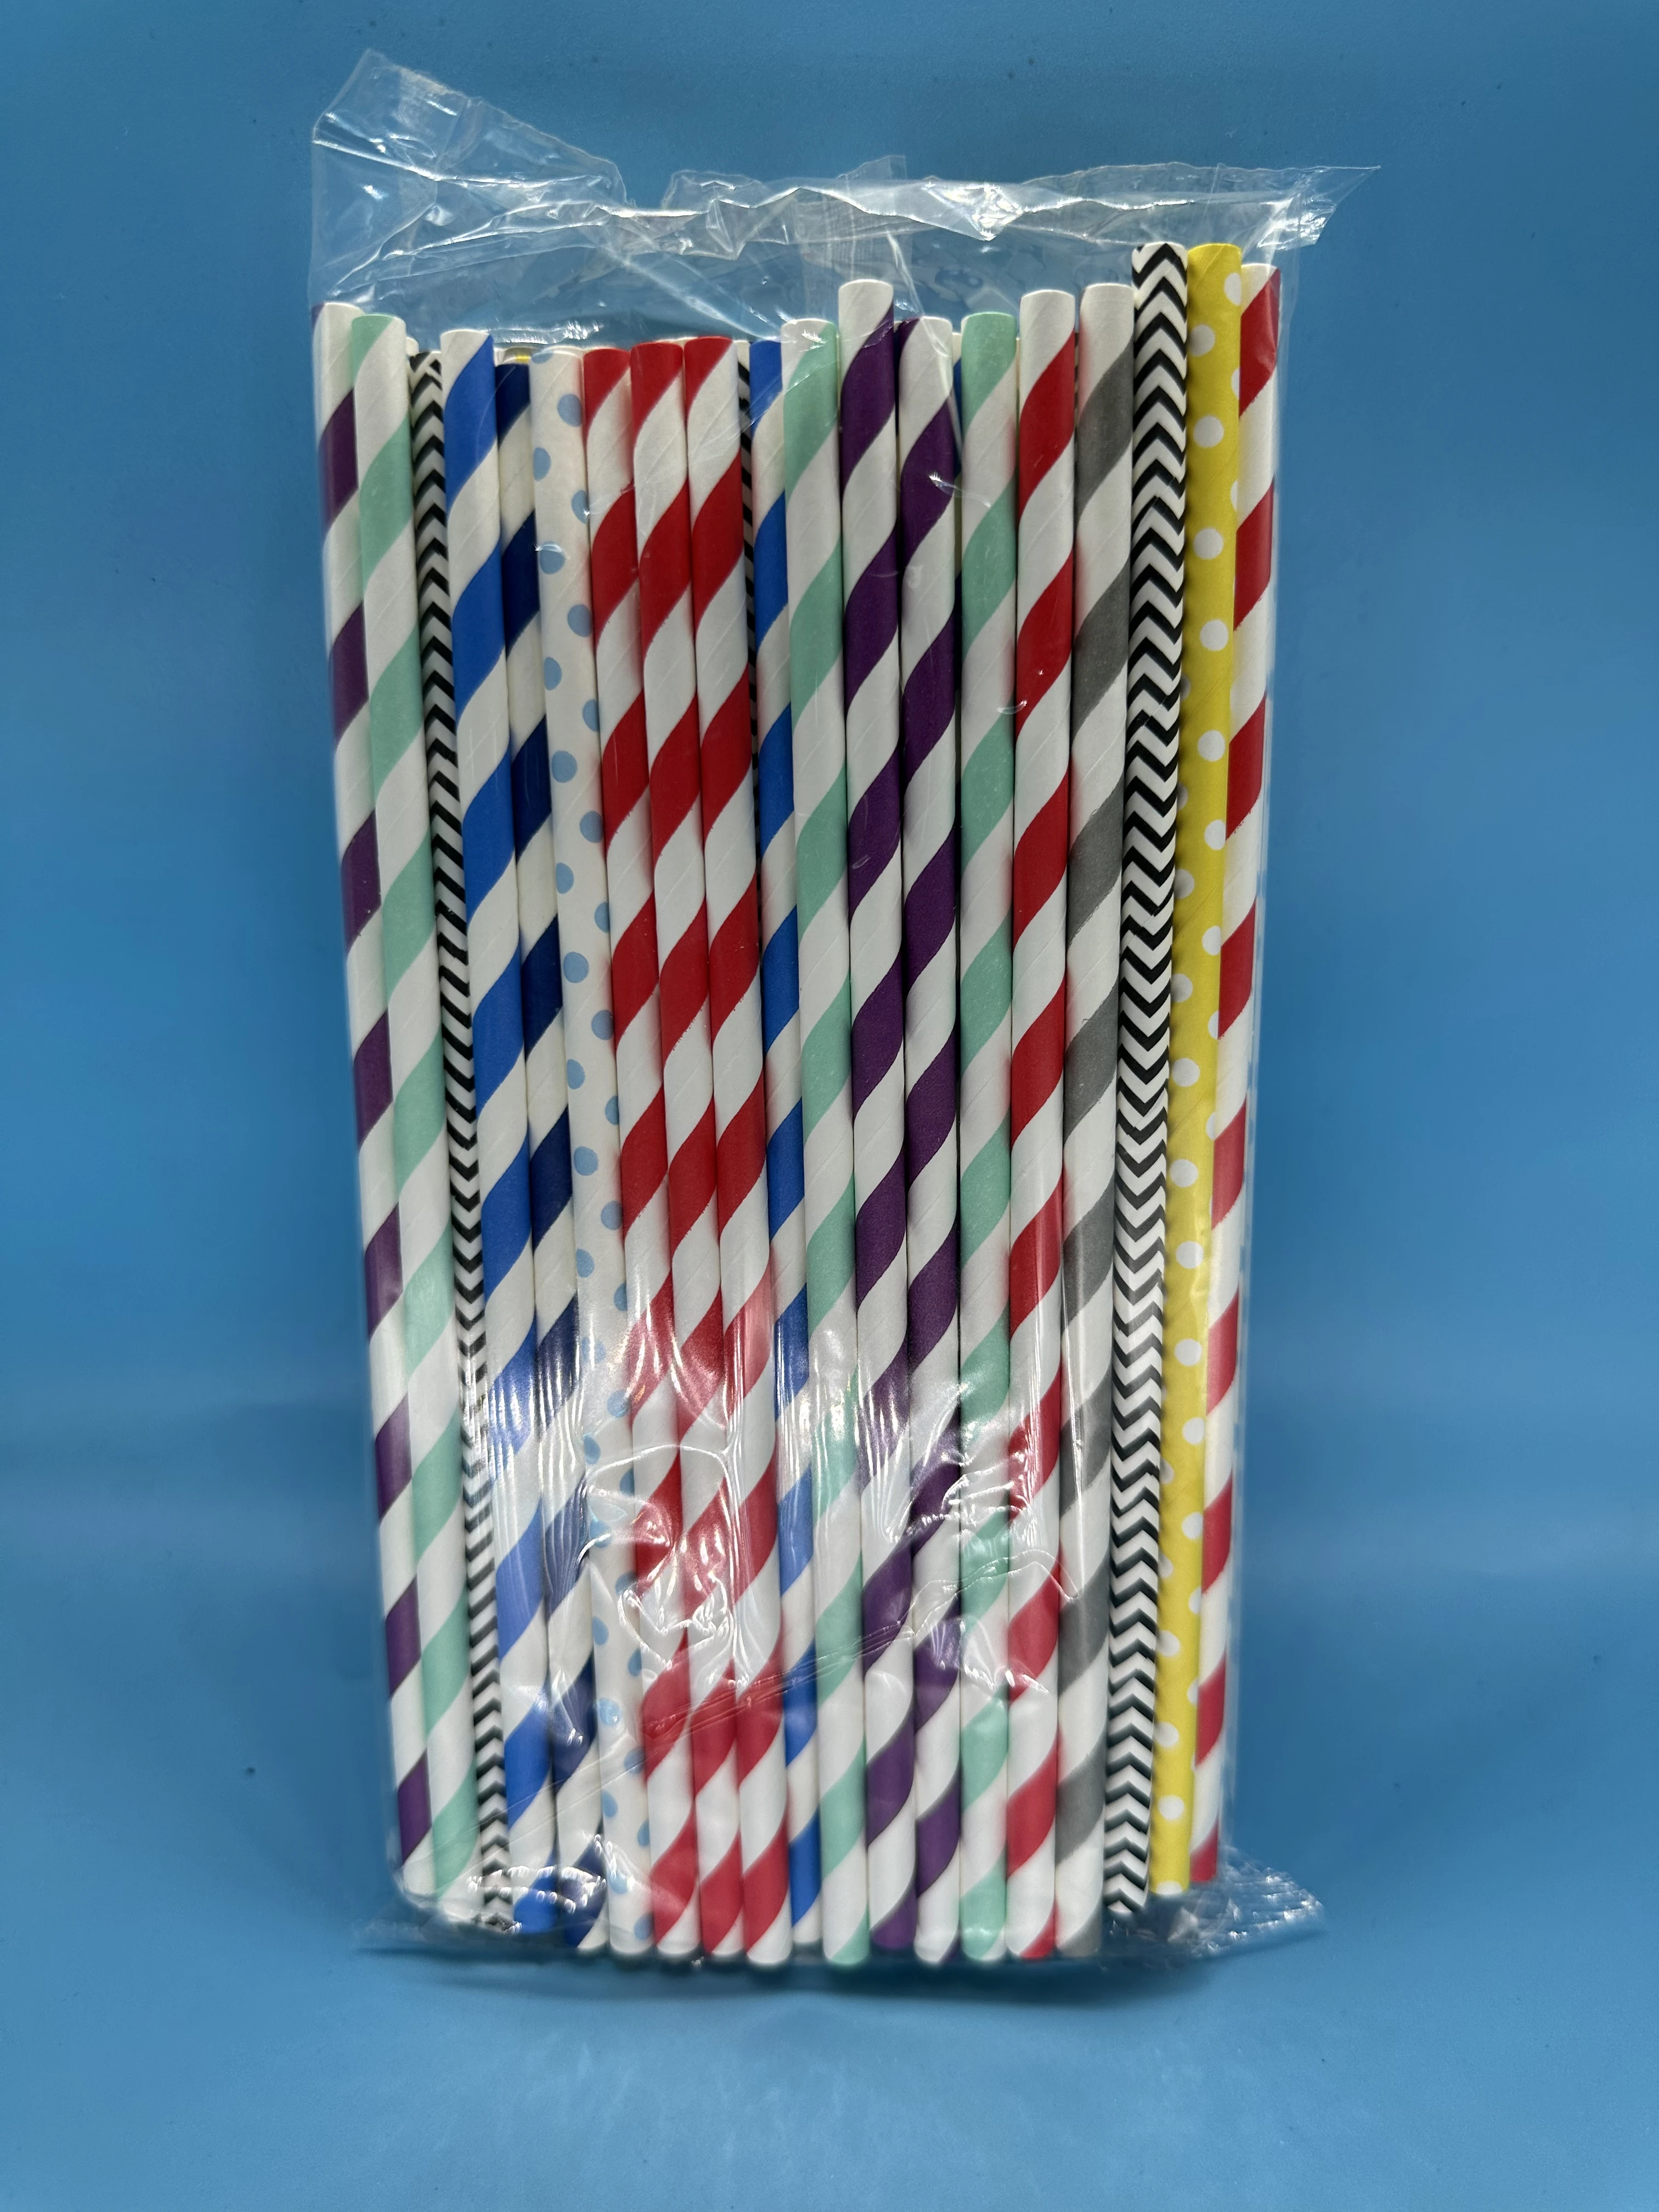 

Wholesale 1,600 Mixed Color Paper Straws - Disposable Color Party Companions for Juice, Coffee, and Drinks